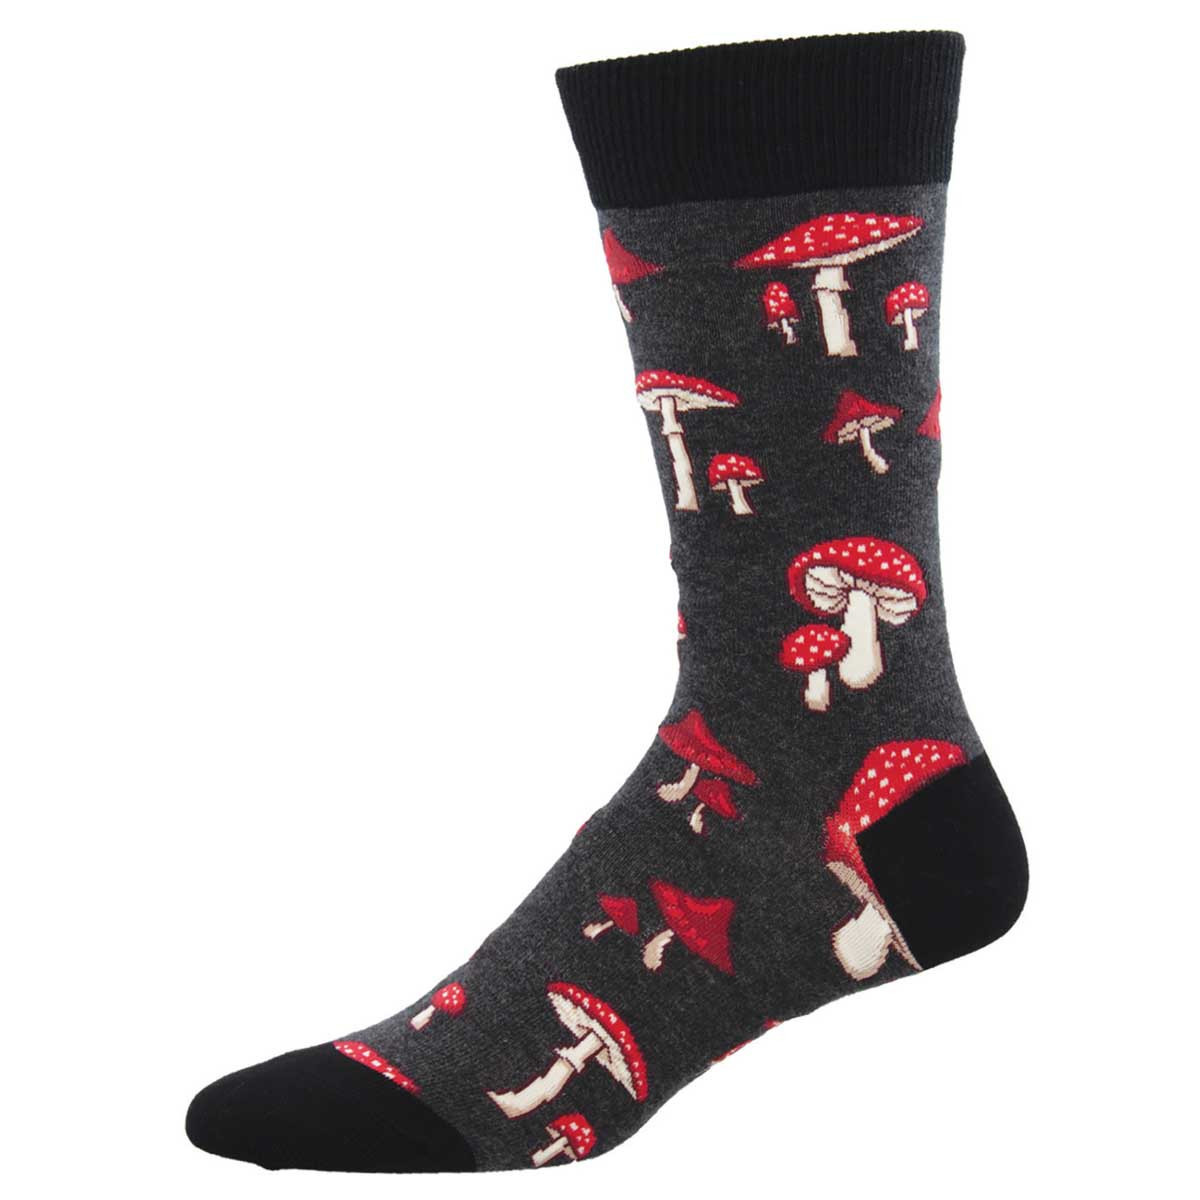 Socksmith - Pretty Fly For A Fungi - Charcoal Heather - Crew - Men's